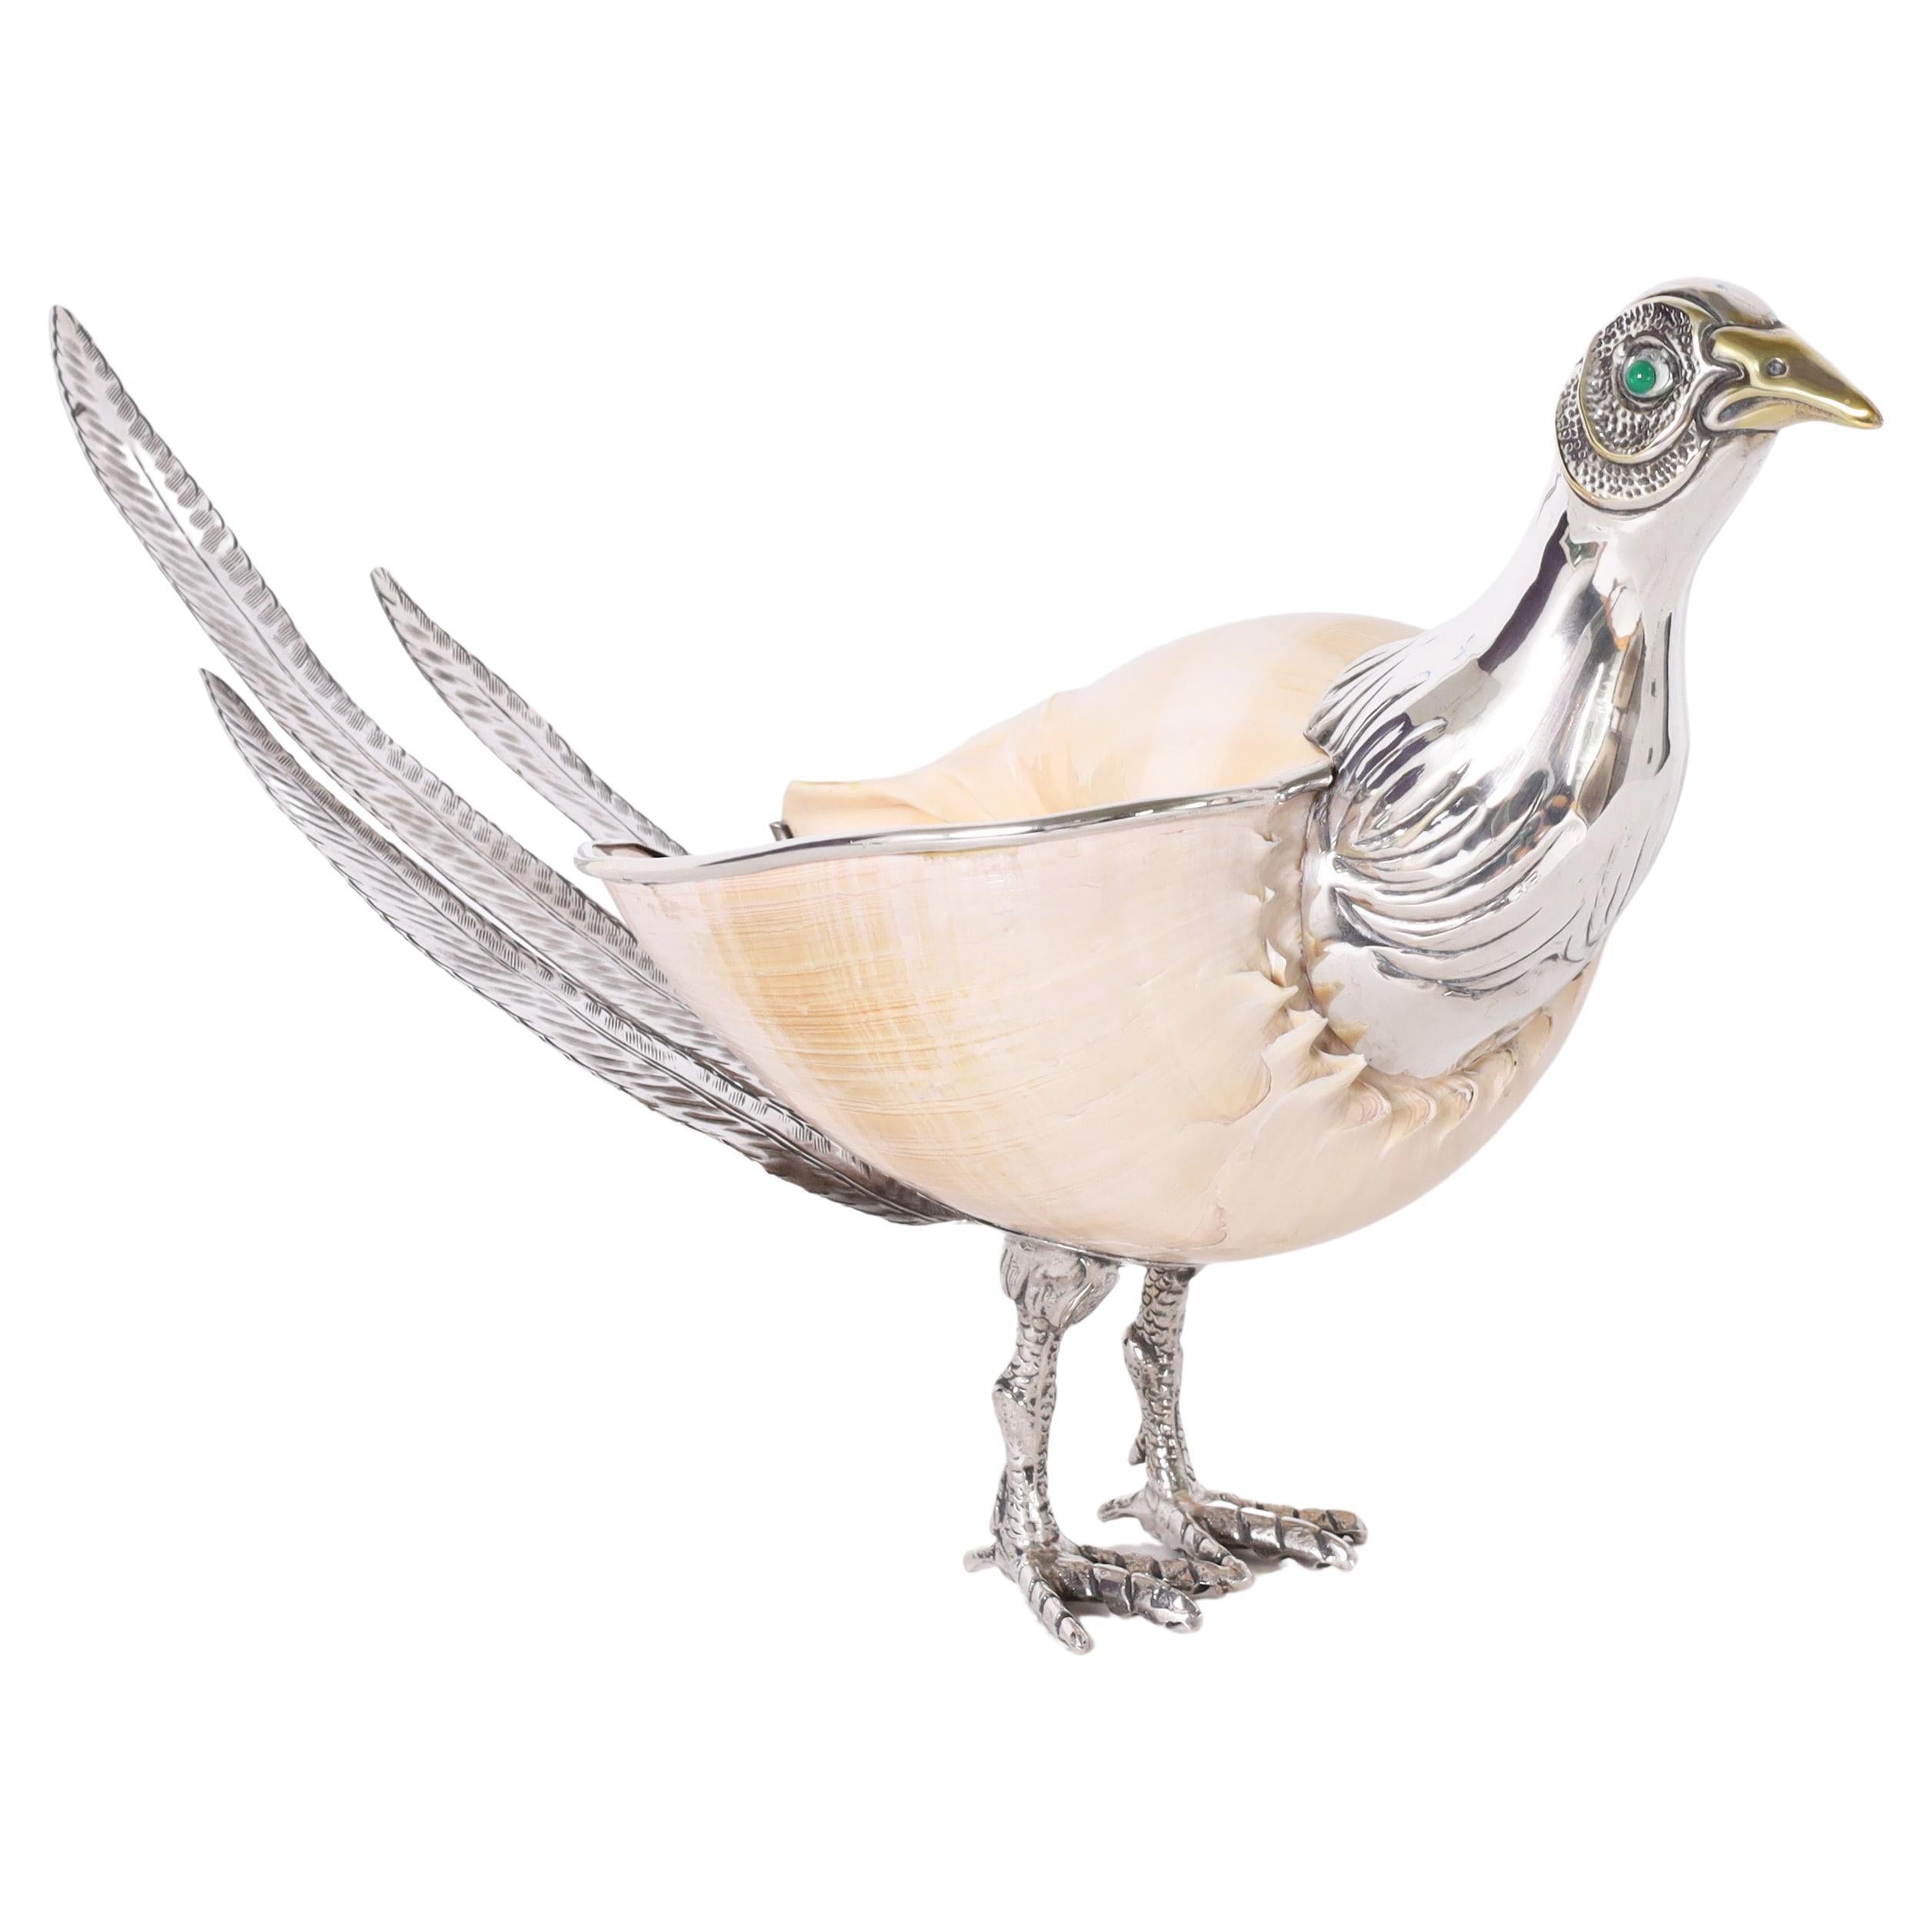 Vintage Silver Plate and Conch Shell Bird Sculpture by Binazzi For Sale